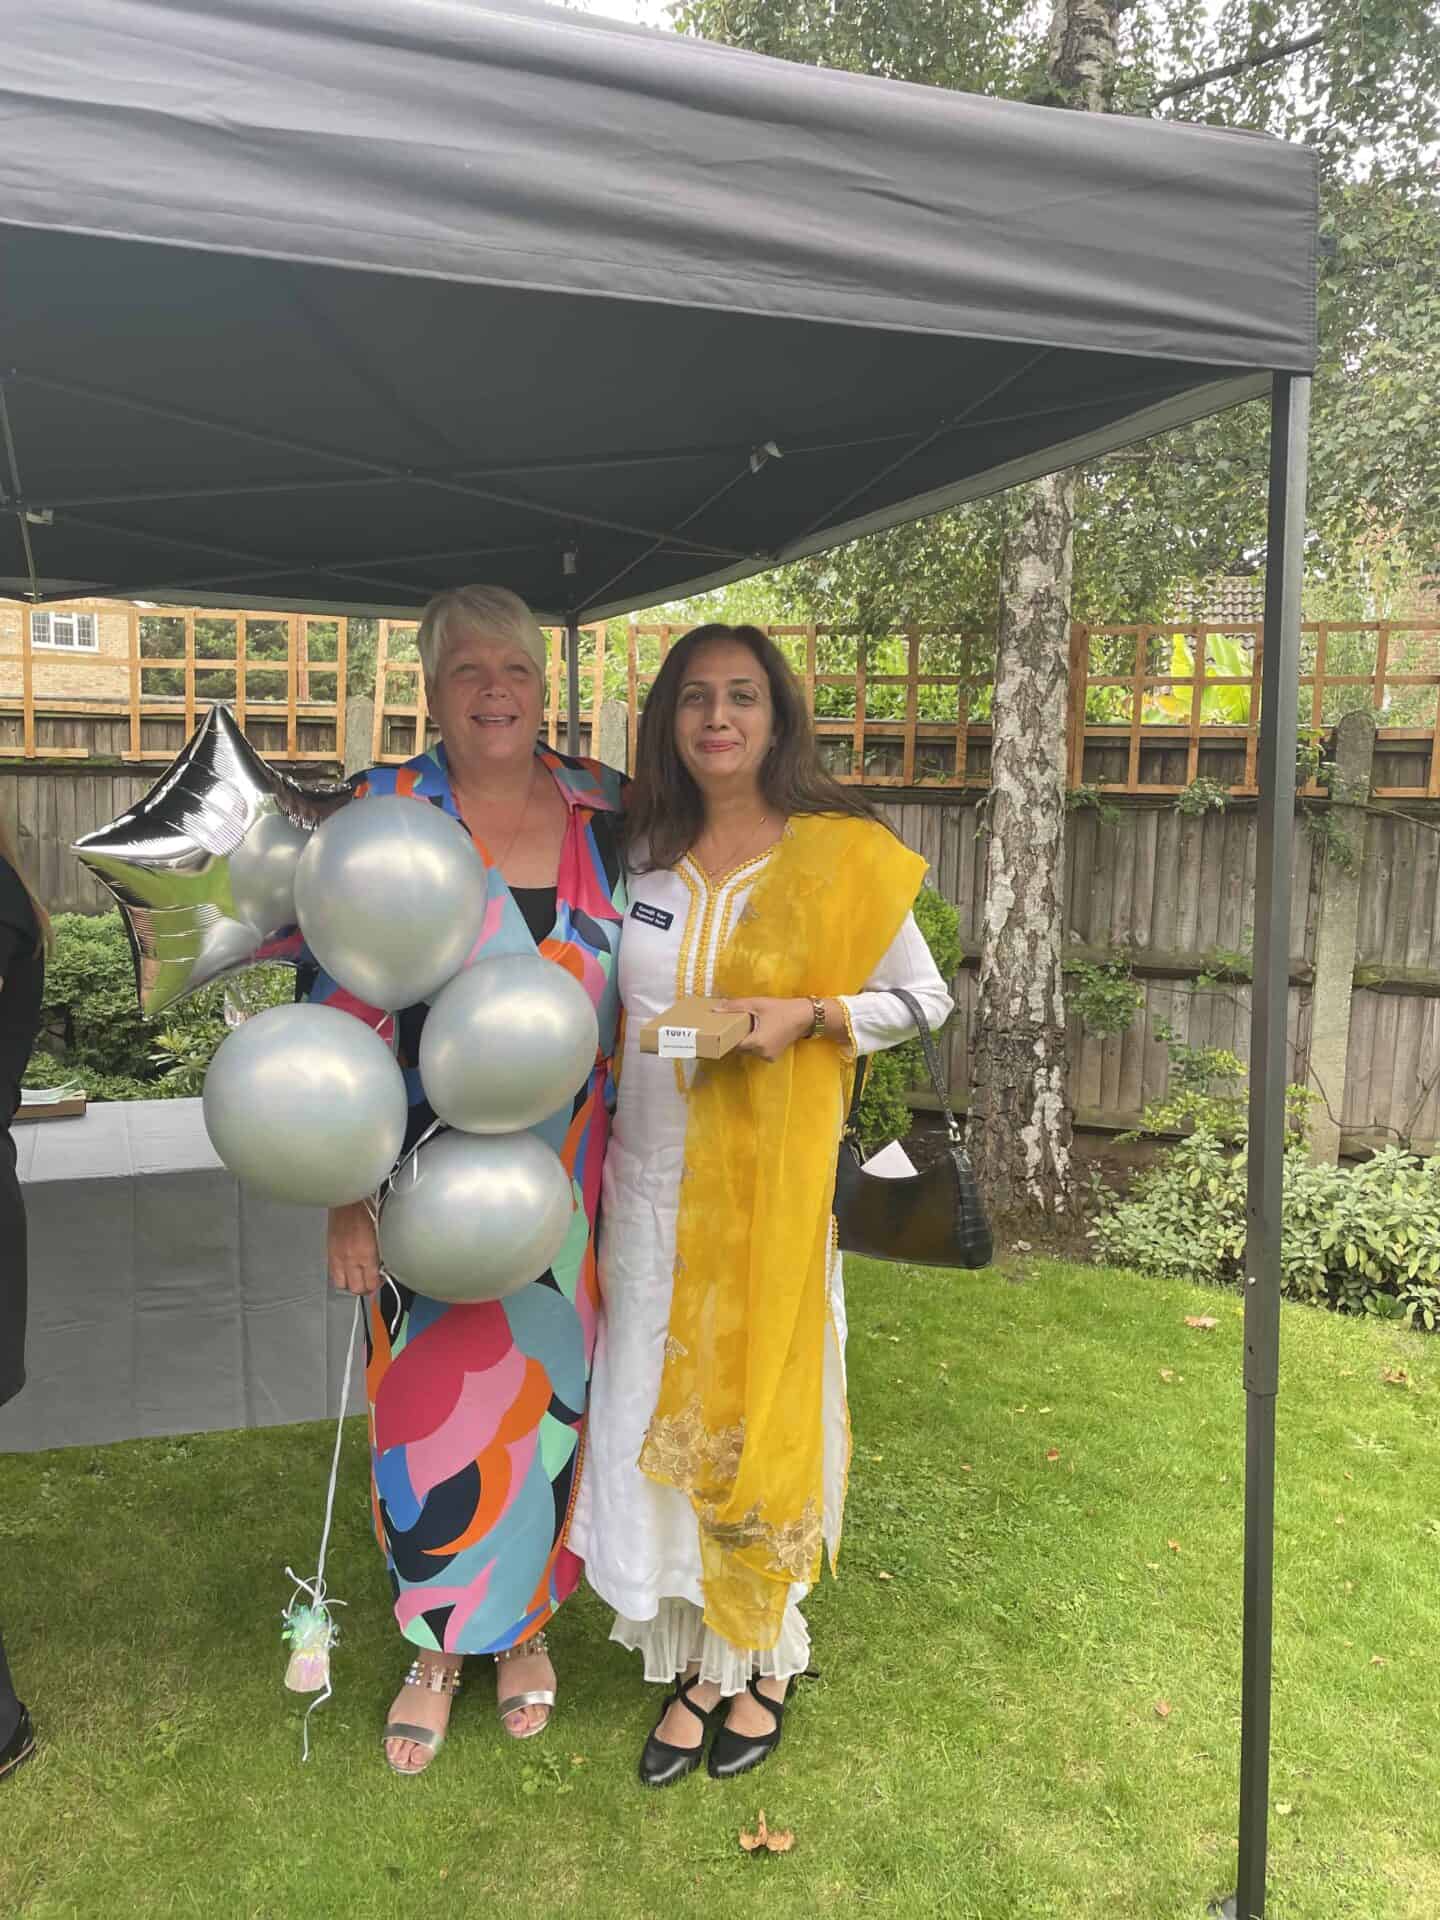 Two smiling women at an outdoor event, one holding a bunch of silver balloons, both dressed for a festive occasion, with a garden and a canopy in the background.